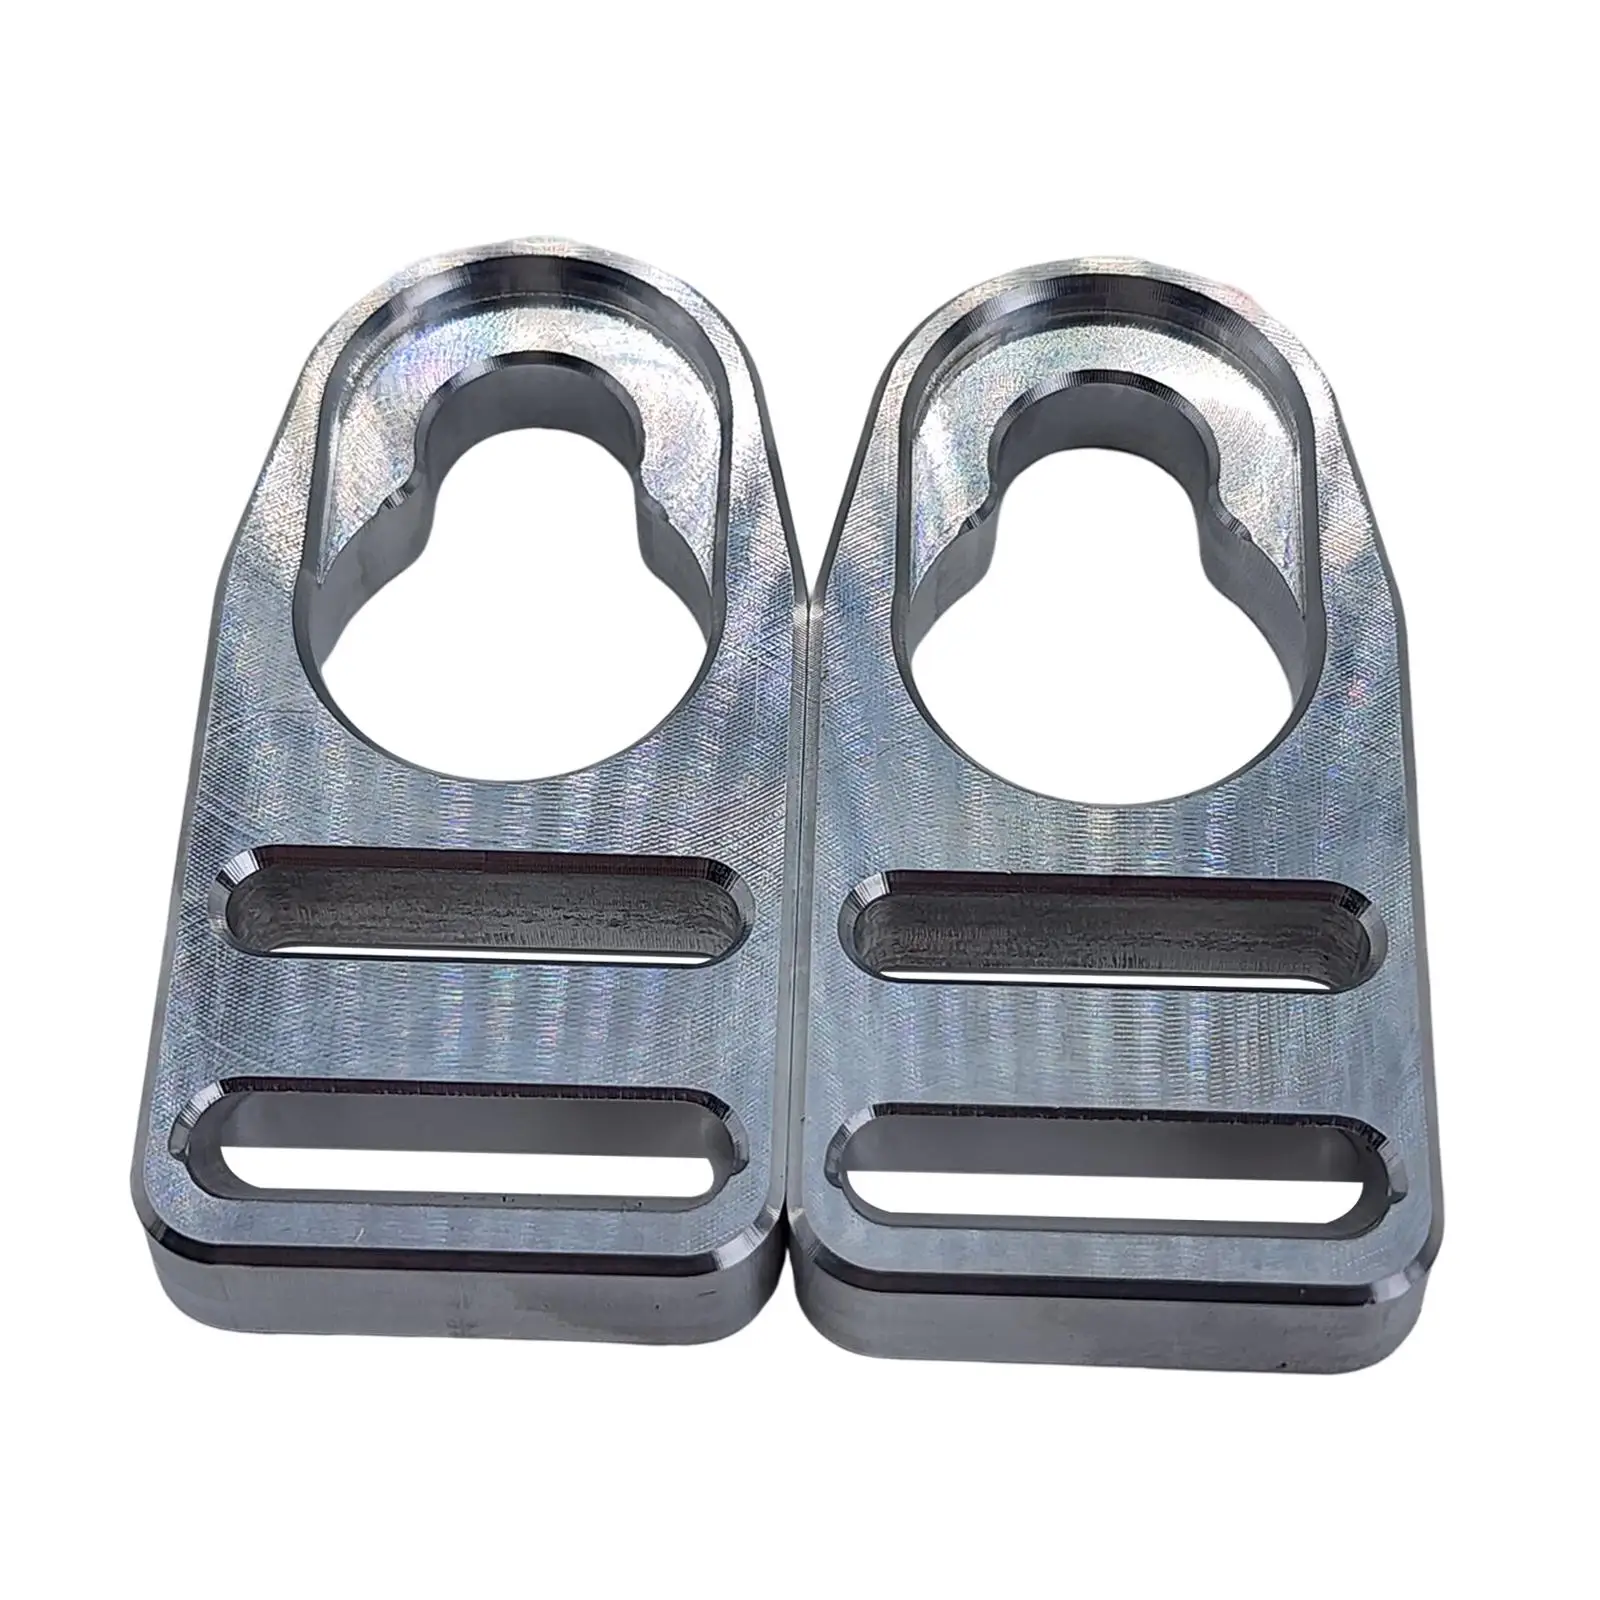 2x Aluminum Kayak seat Clips Direct Replaces Spare Parts Repair Kit for Emotion Durable Accessories Easy Install